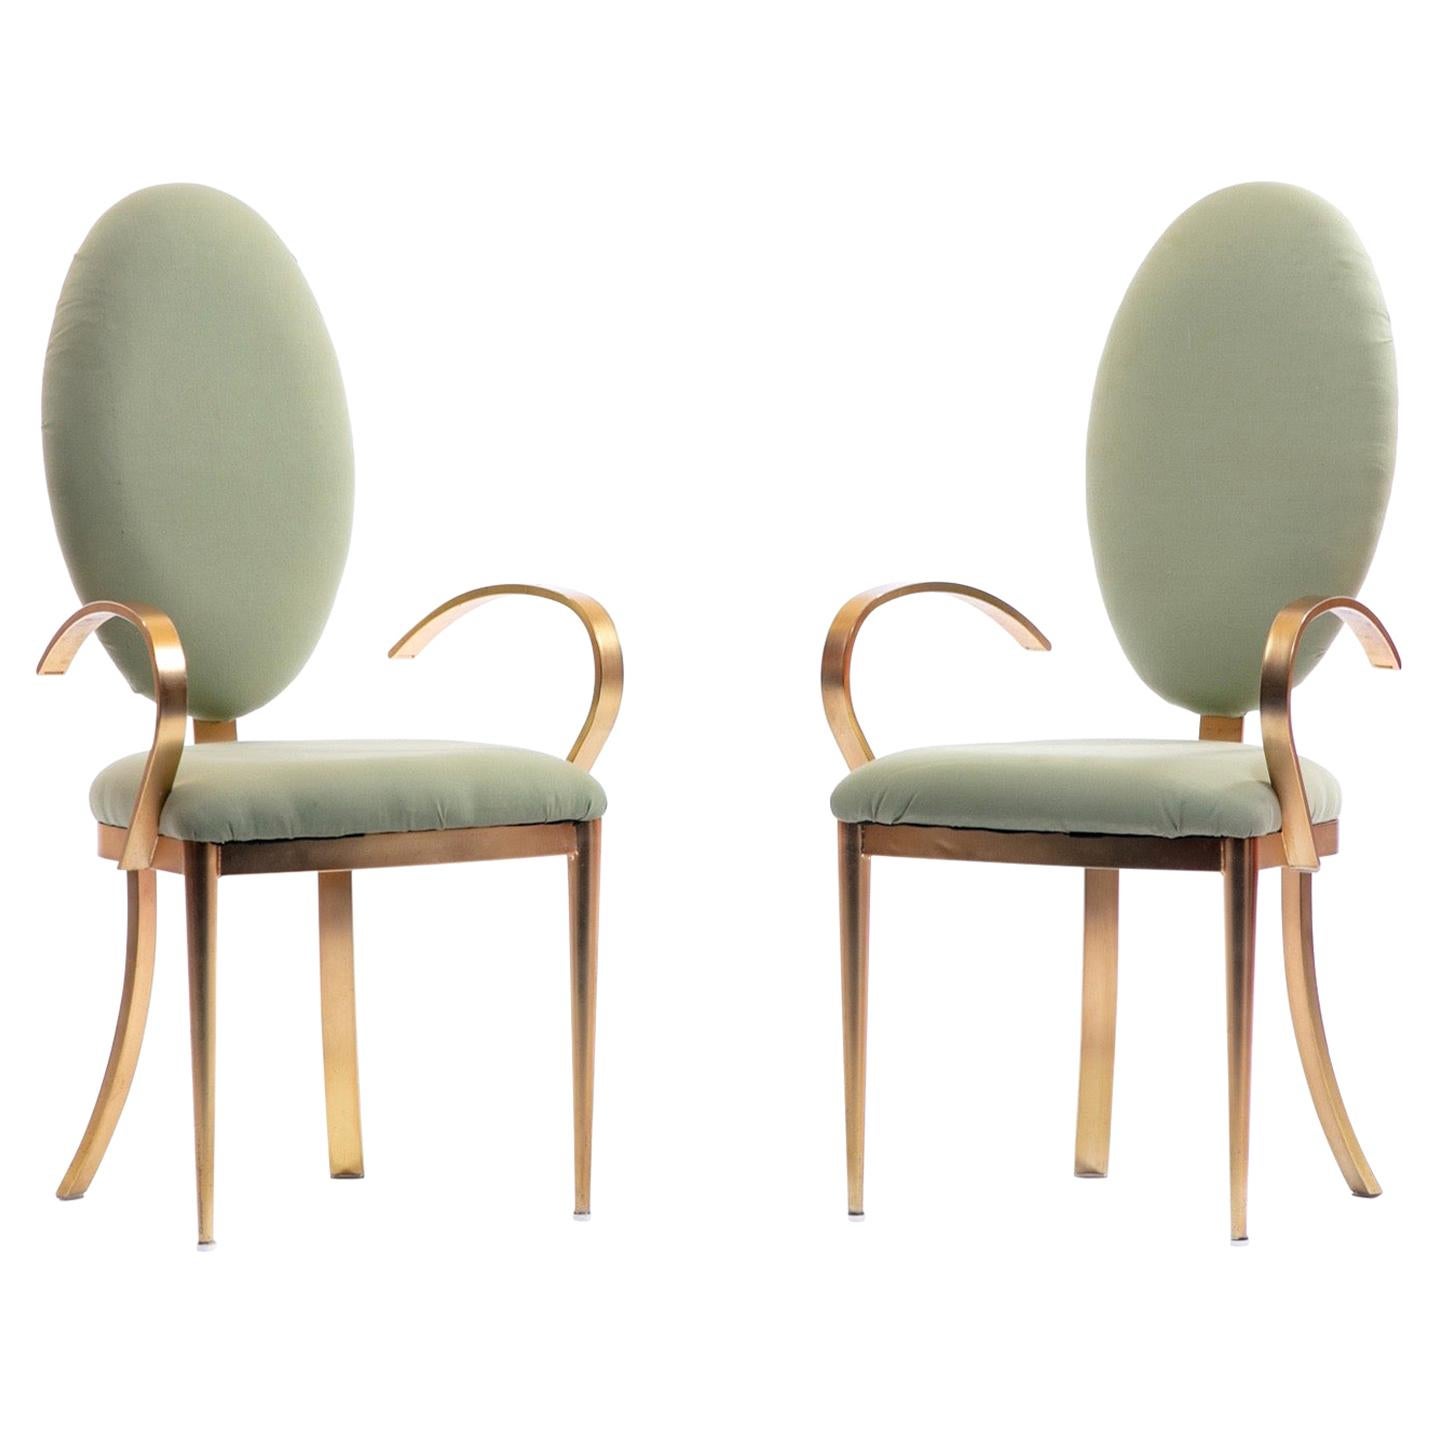 Design Institute of America Brushed Brass Tall Oval Back Side Chairs